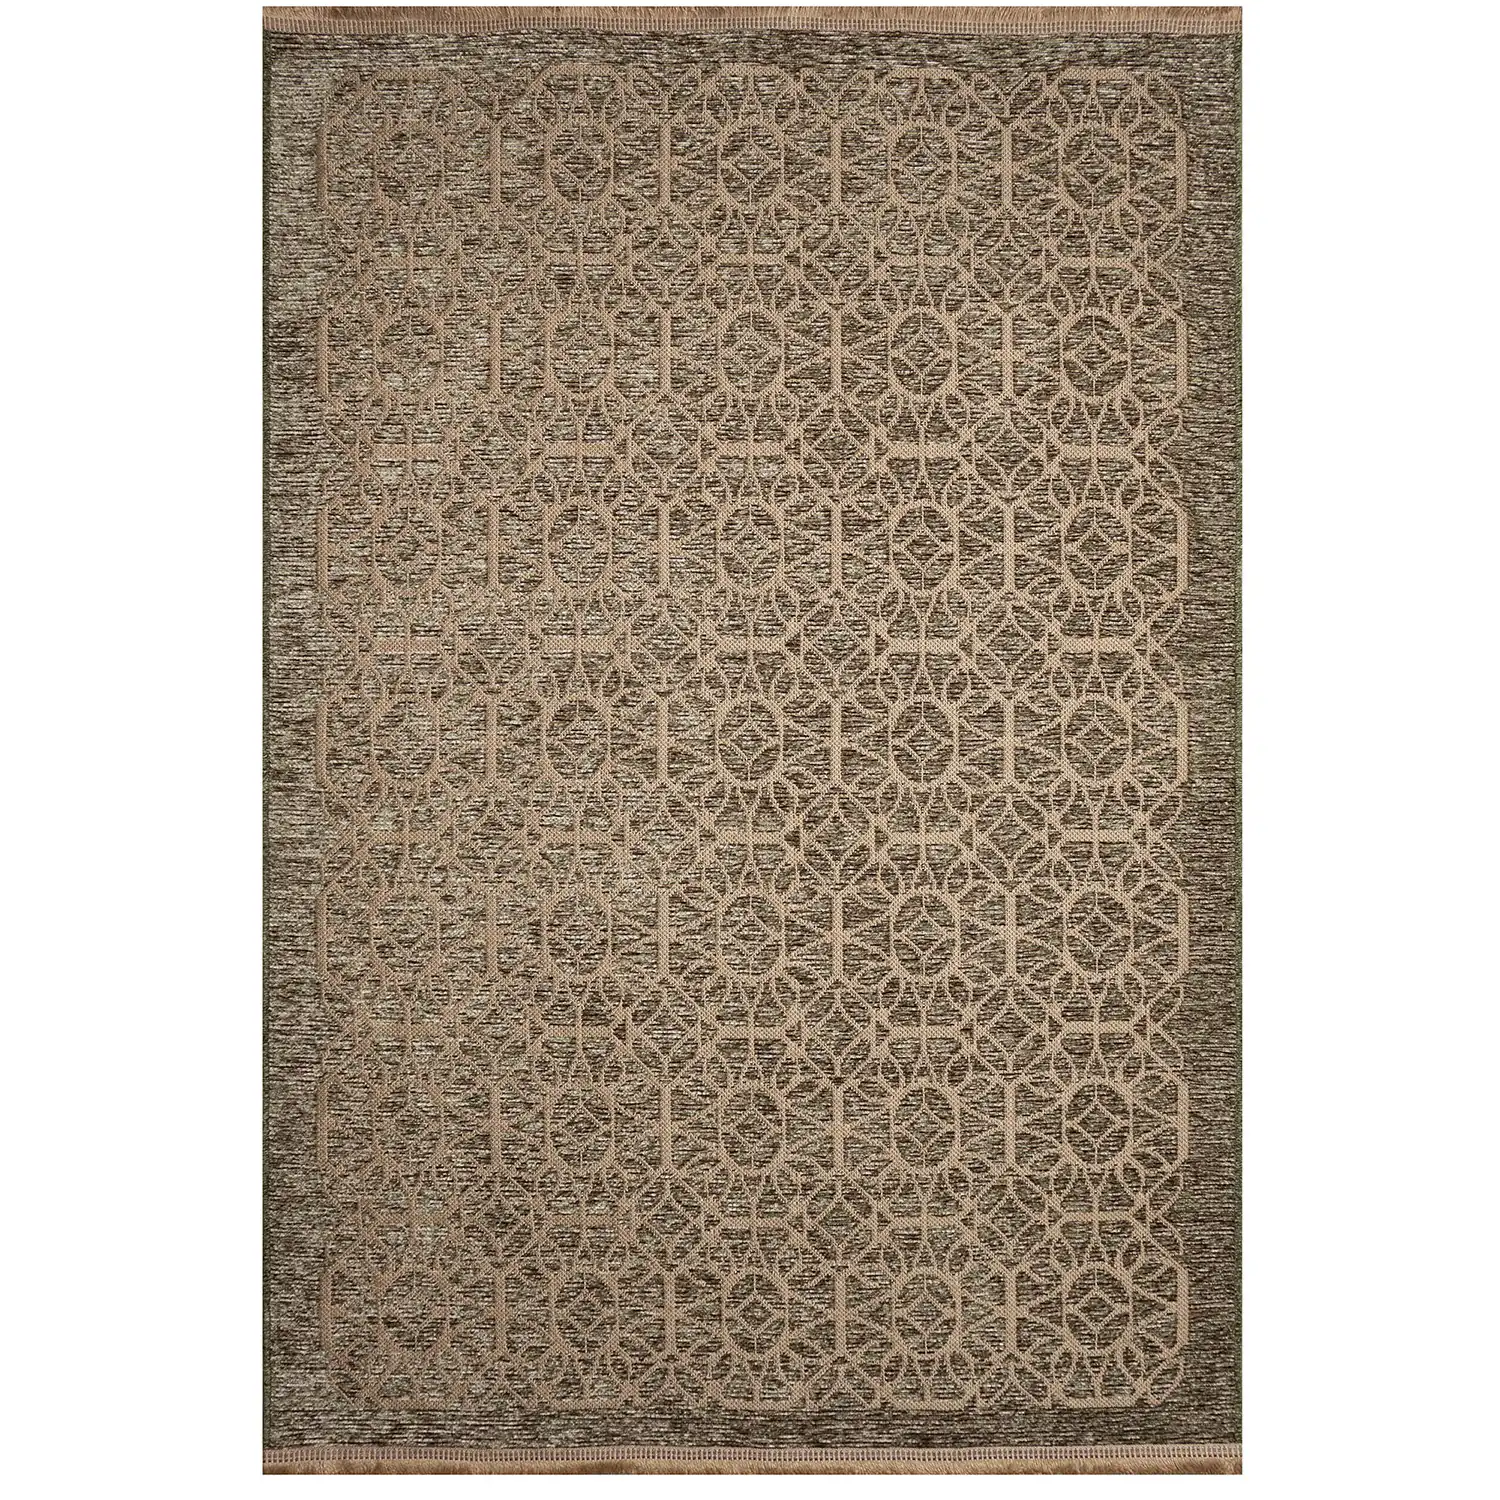 Liora Manne Mercer Low Profile  Non-Skid Indoor  Woven Rug- Tracery Green  Product Image